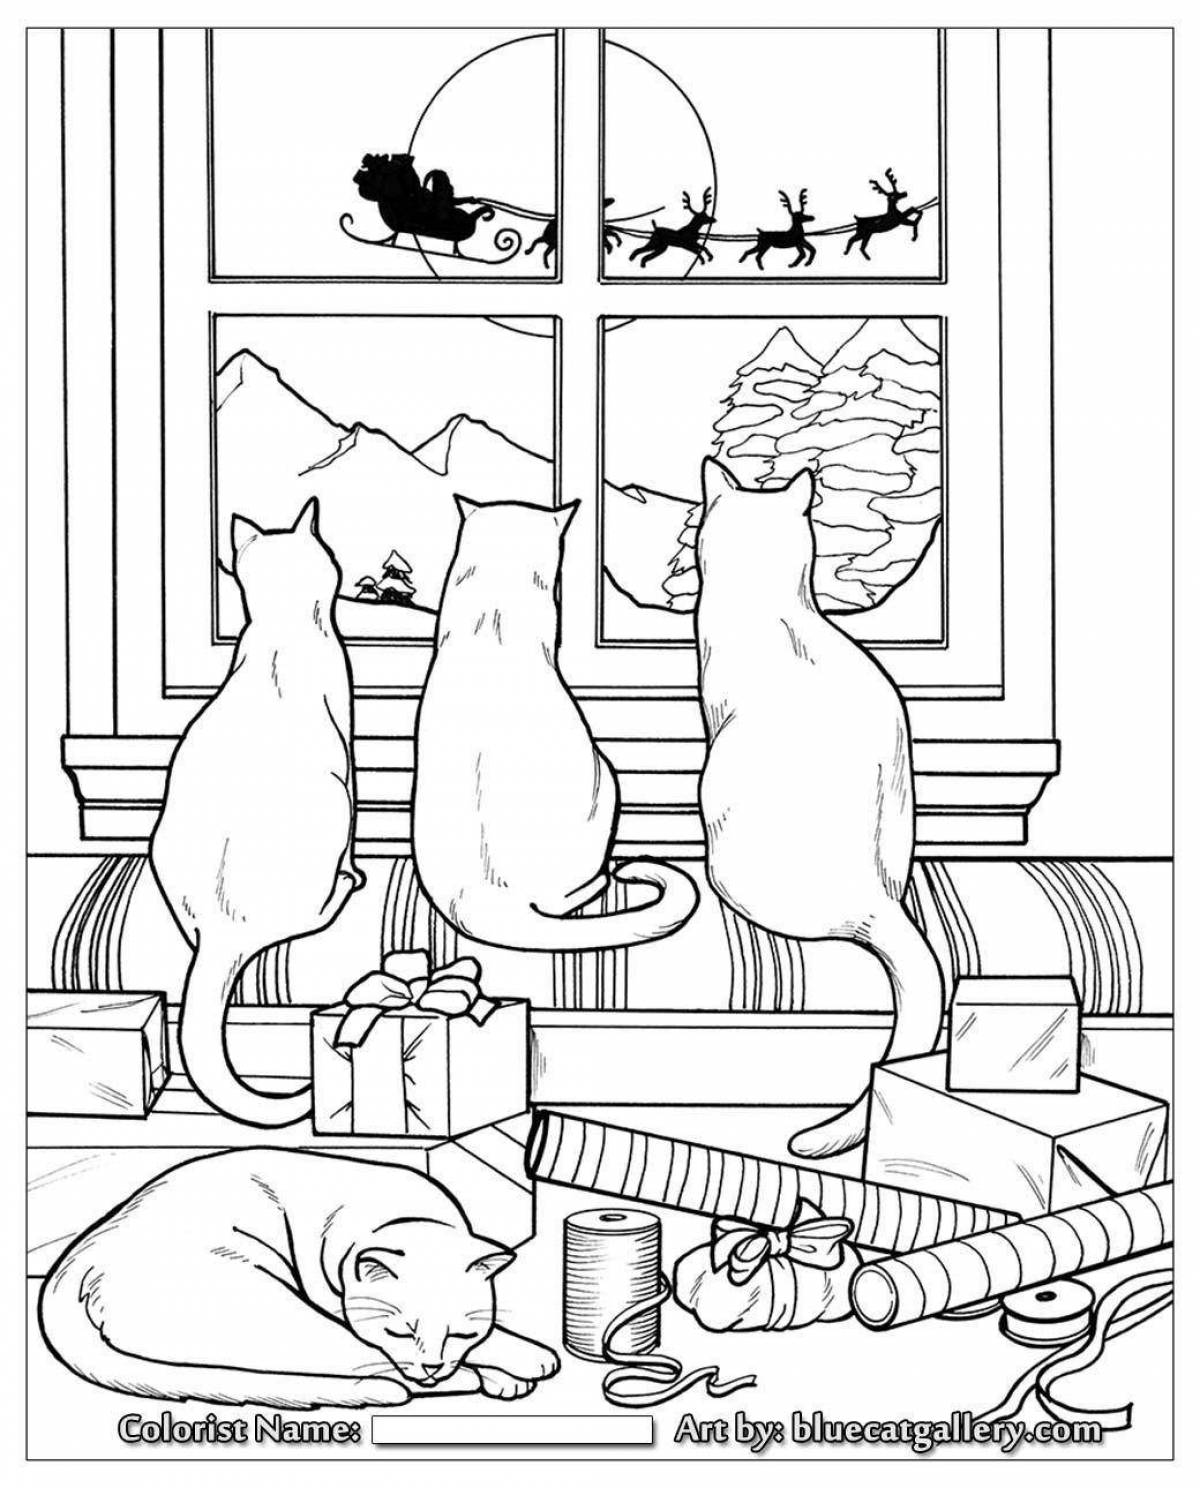 Adorable kitten coloring page